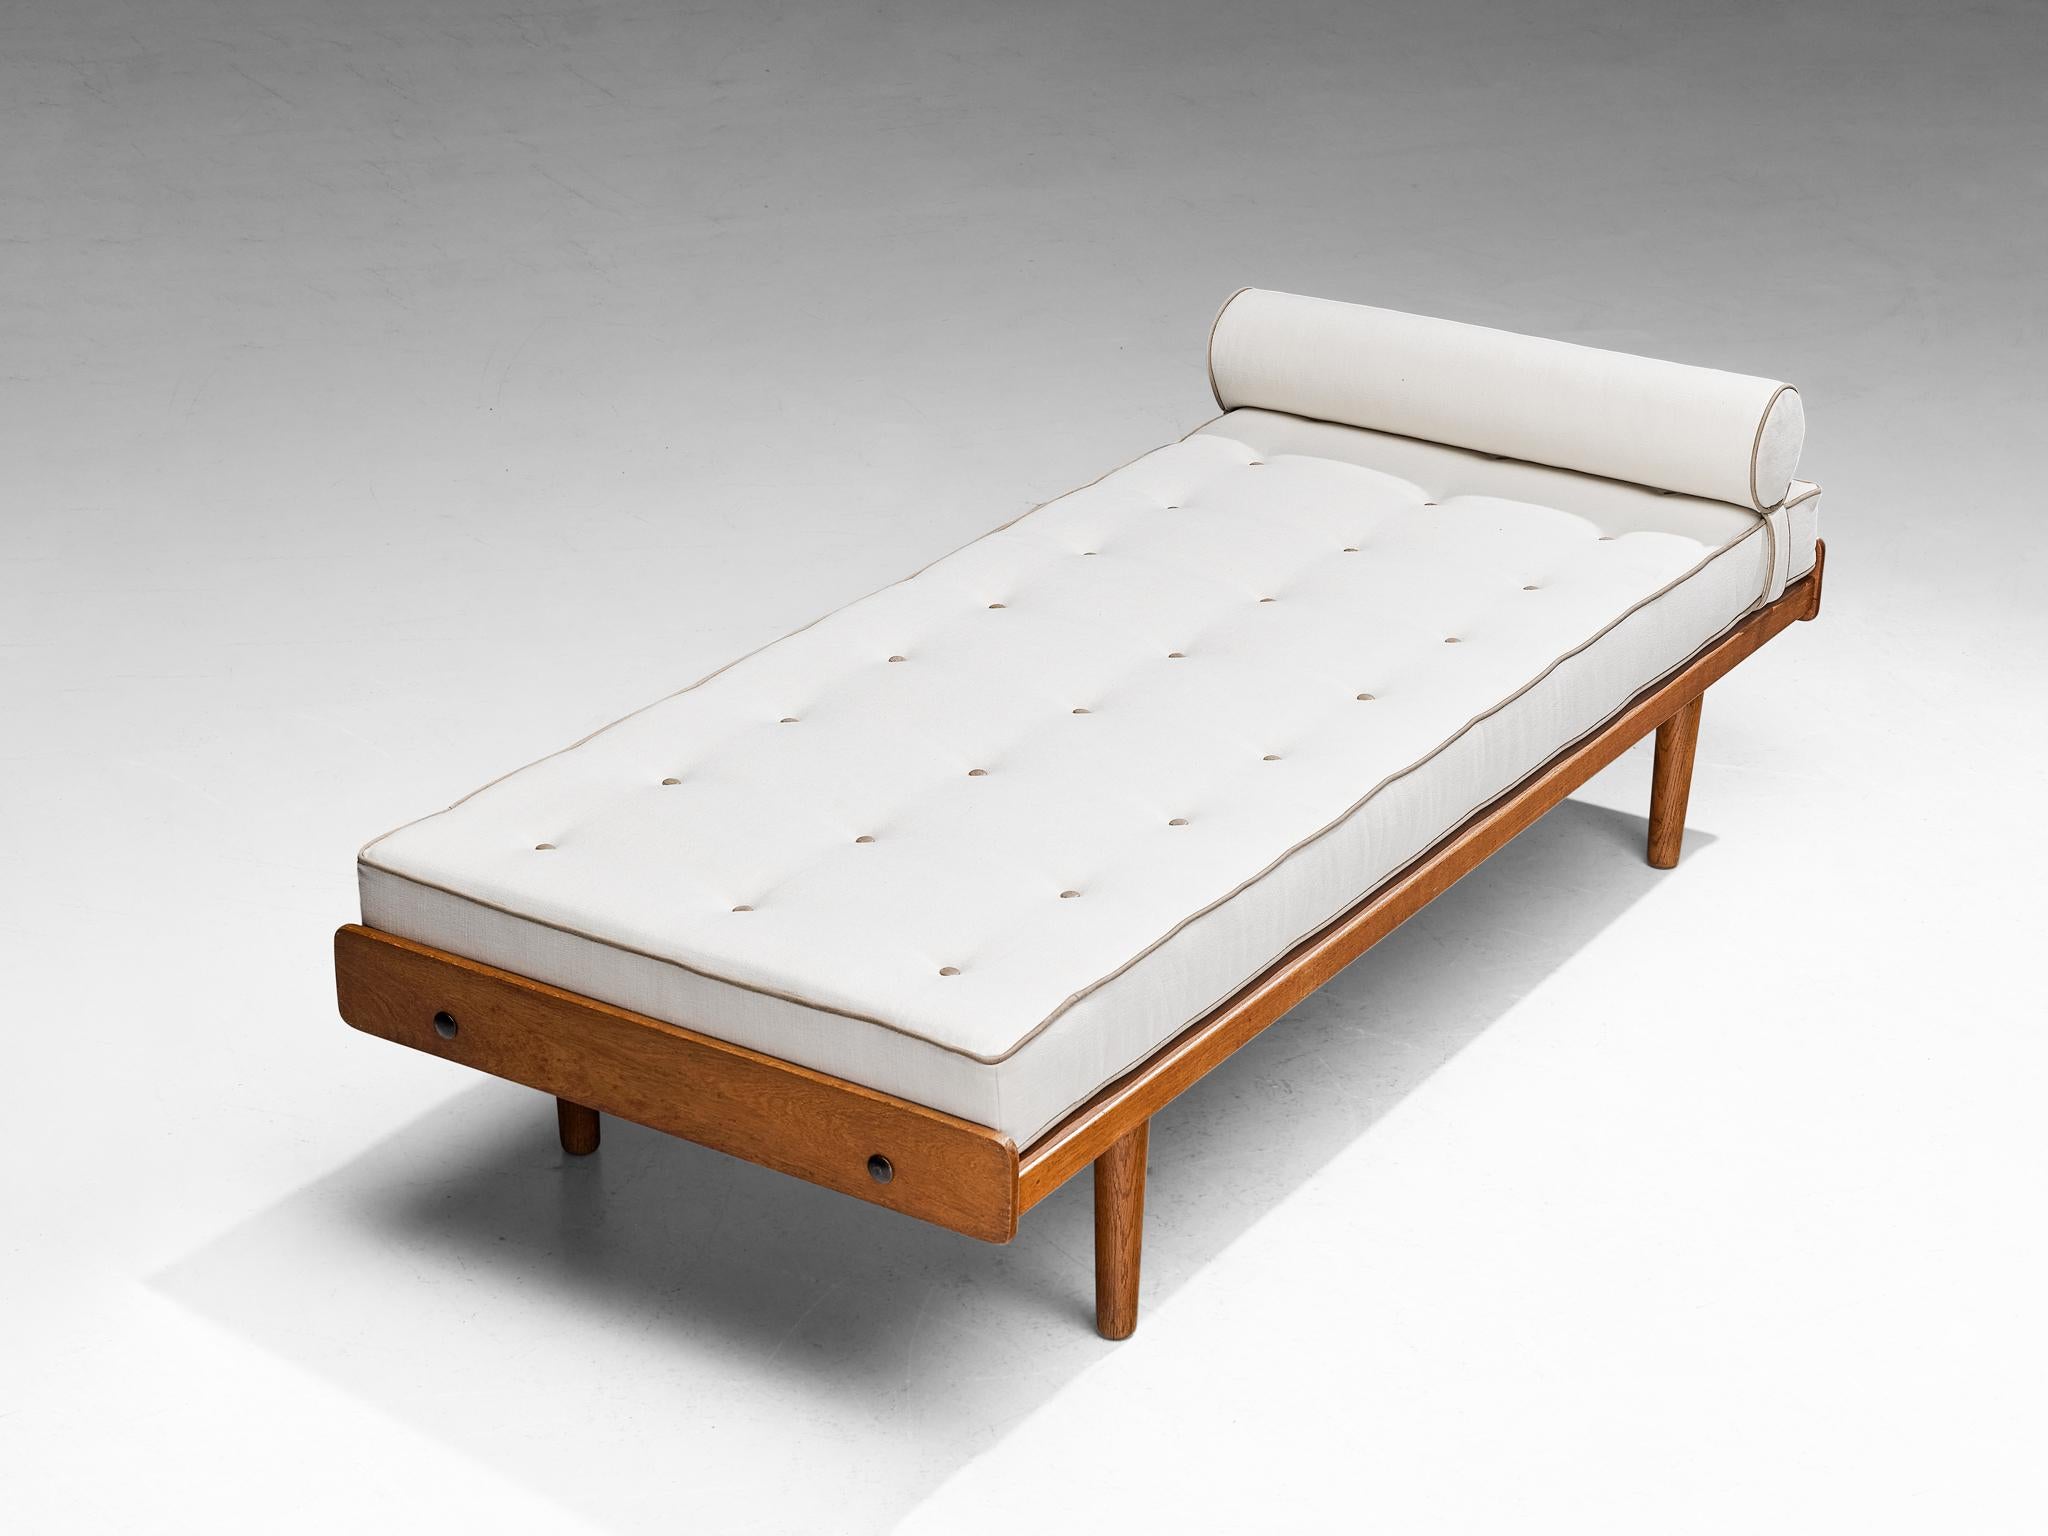 Ejvind A. Johansson for FDB Møbler, daybed, model 'G19', oak, Denmark, 1957

A simple and minimalist bed designed by Danish furniture designer Ejvind A. Johansson. The construction of this design is based on clear lines and pure shapes. The legs are